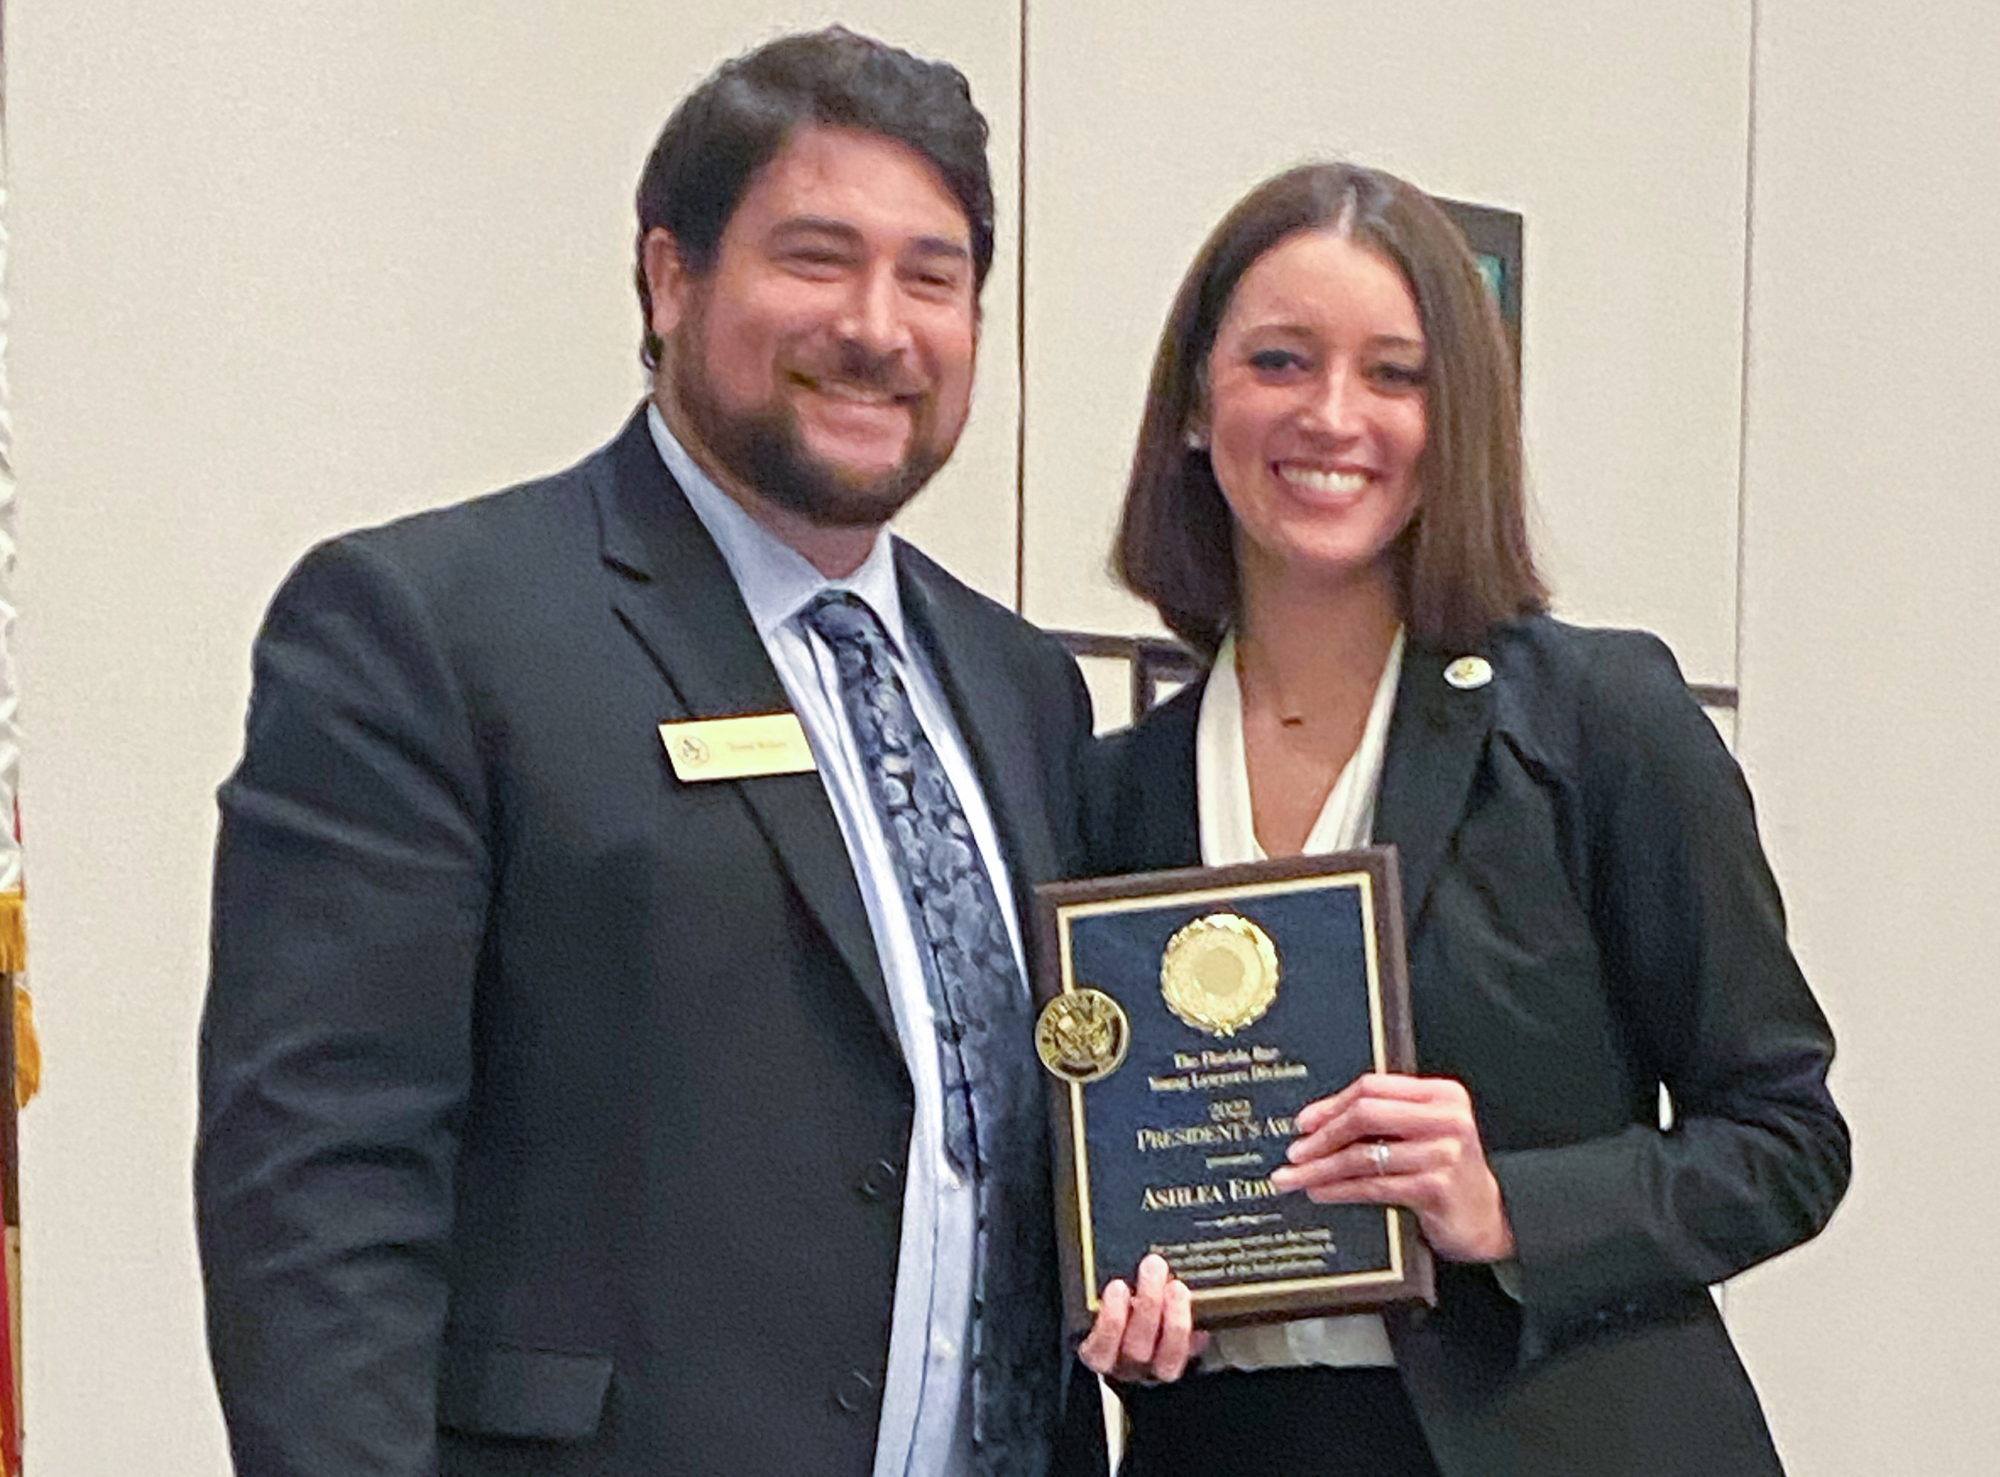 The Florida Bar Young Lawyers Division 2021-22 President Todd Lawrence Baker presented the President’s Award to Ashlea Edwards, YLD governor and a past president of the Jacksonville Bar Association Young Lawyers Division.